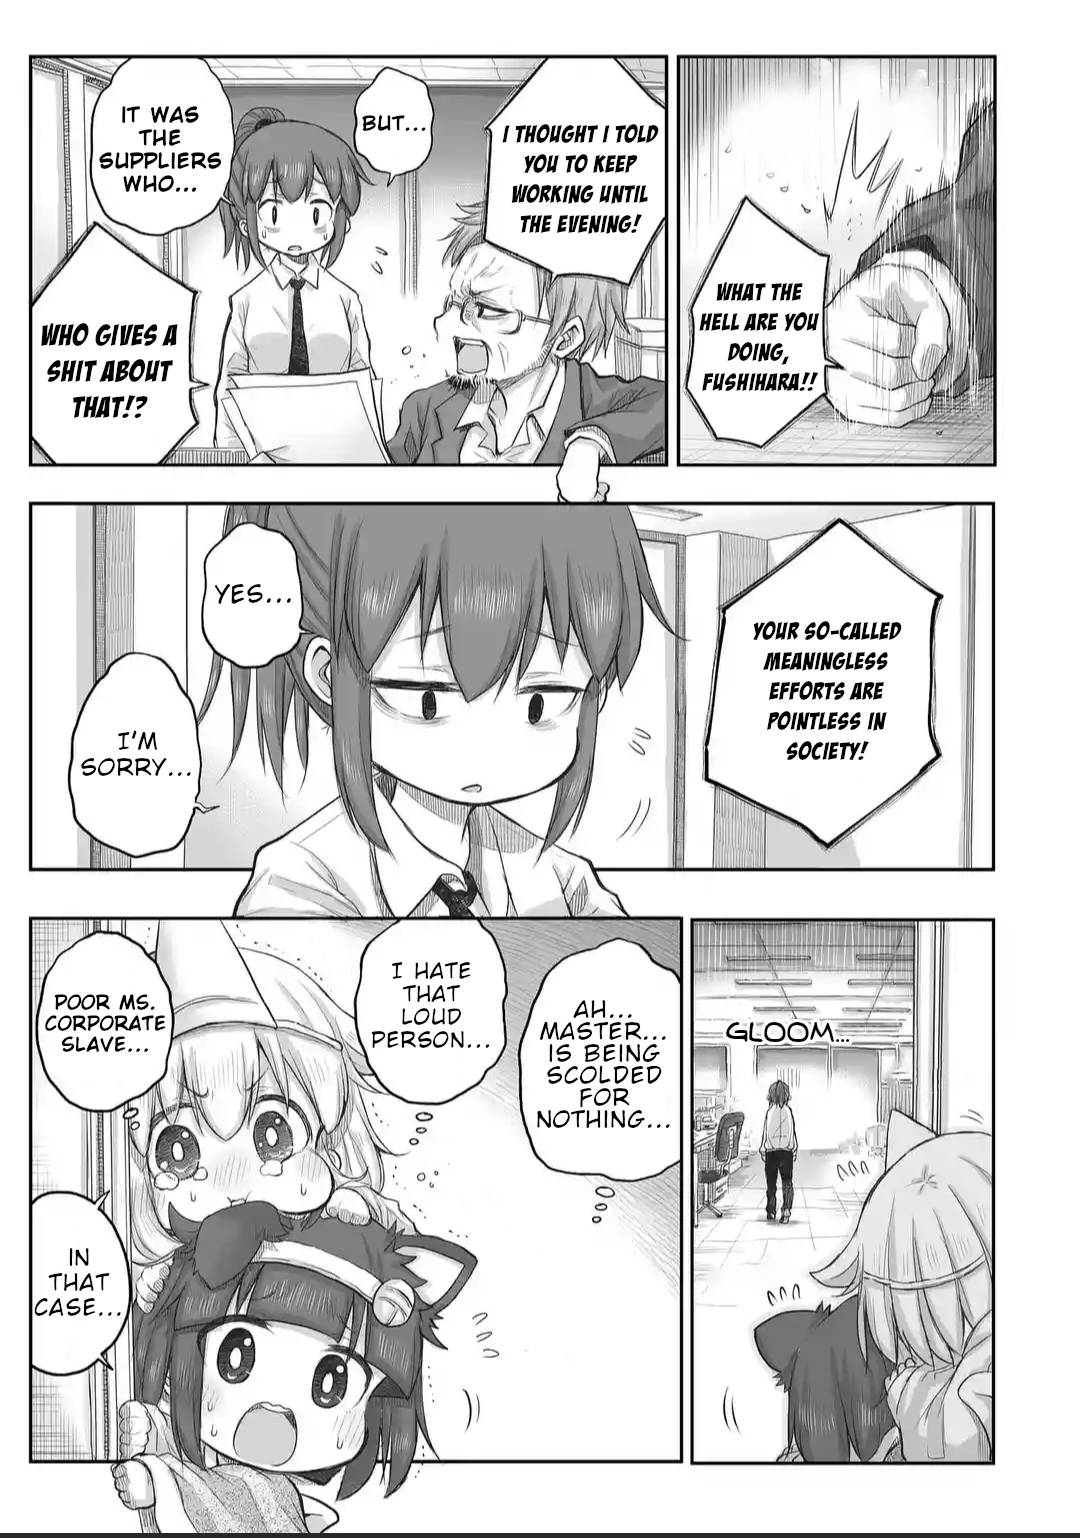 Ms. Corporate Slave Wants to be Healed by a Loli Spirit - chapter 35 - #2